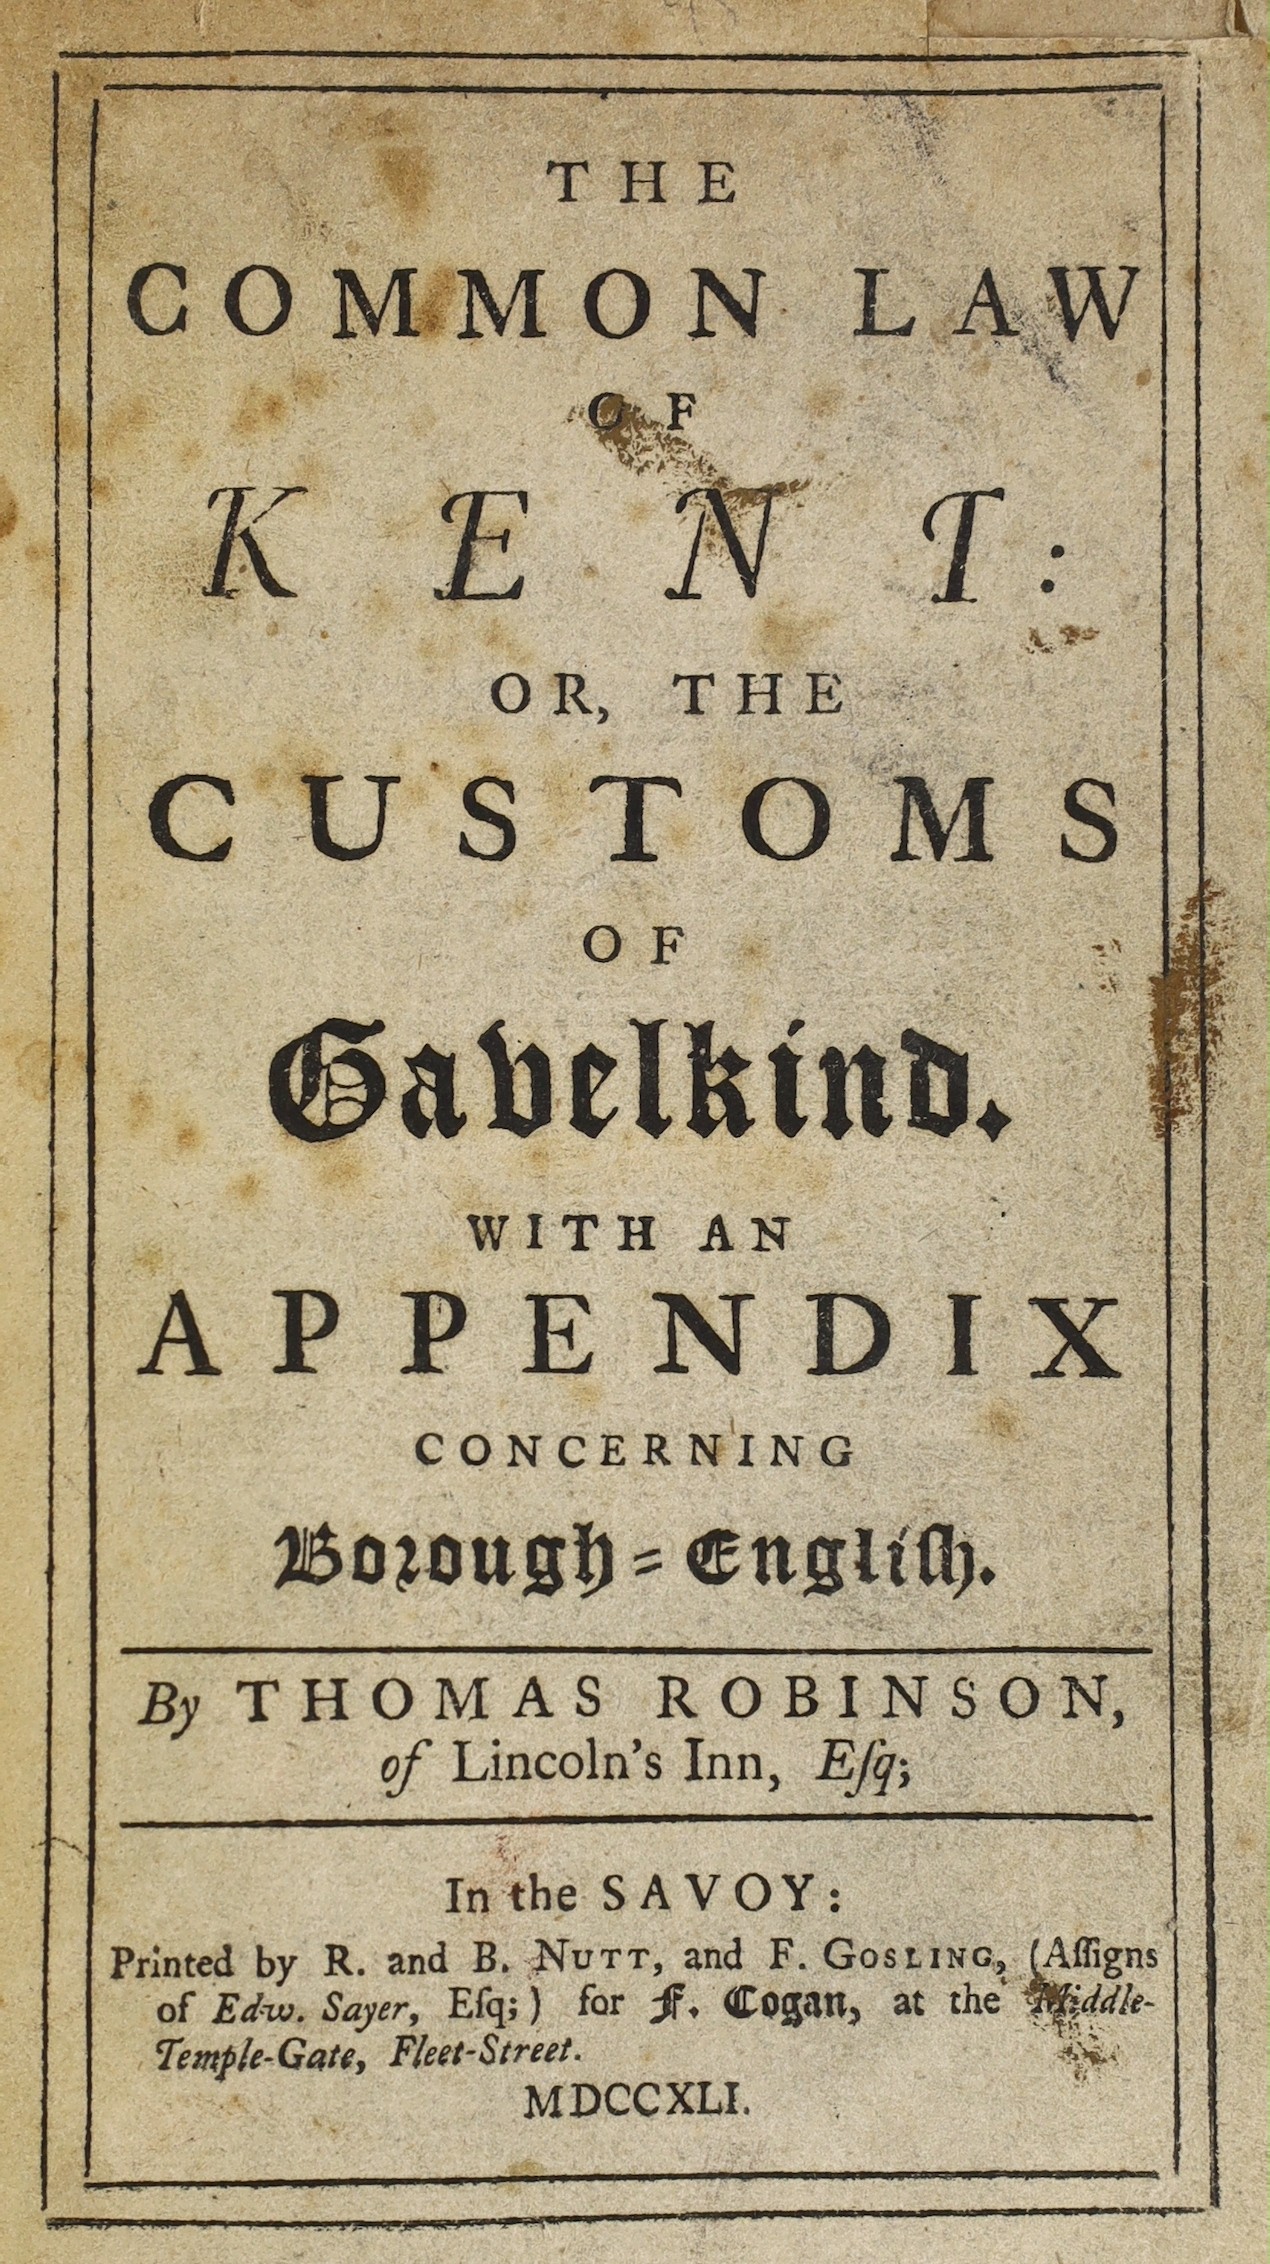 KENT: Robinson, Thomas - The Common Law of Kent: or, the Customs of Gavelkind. With an Appendix concerning Borough-English. calf-backed cloth. 1741; Lambarde, William - A Perambulation of Kent ... (new edition) engraved